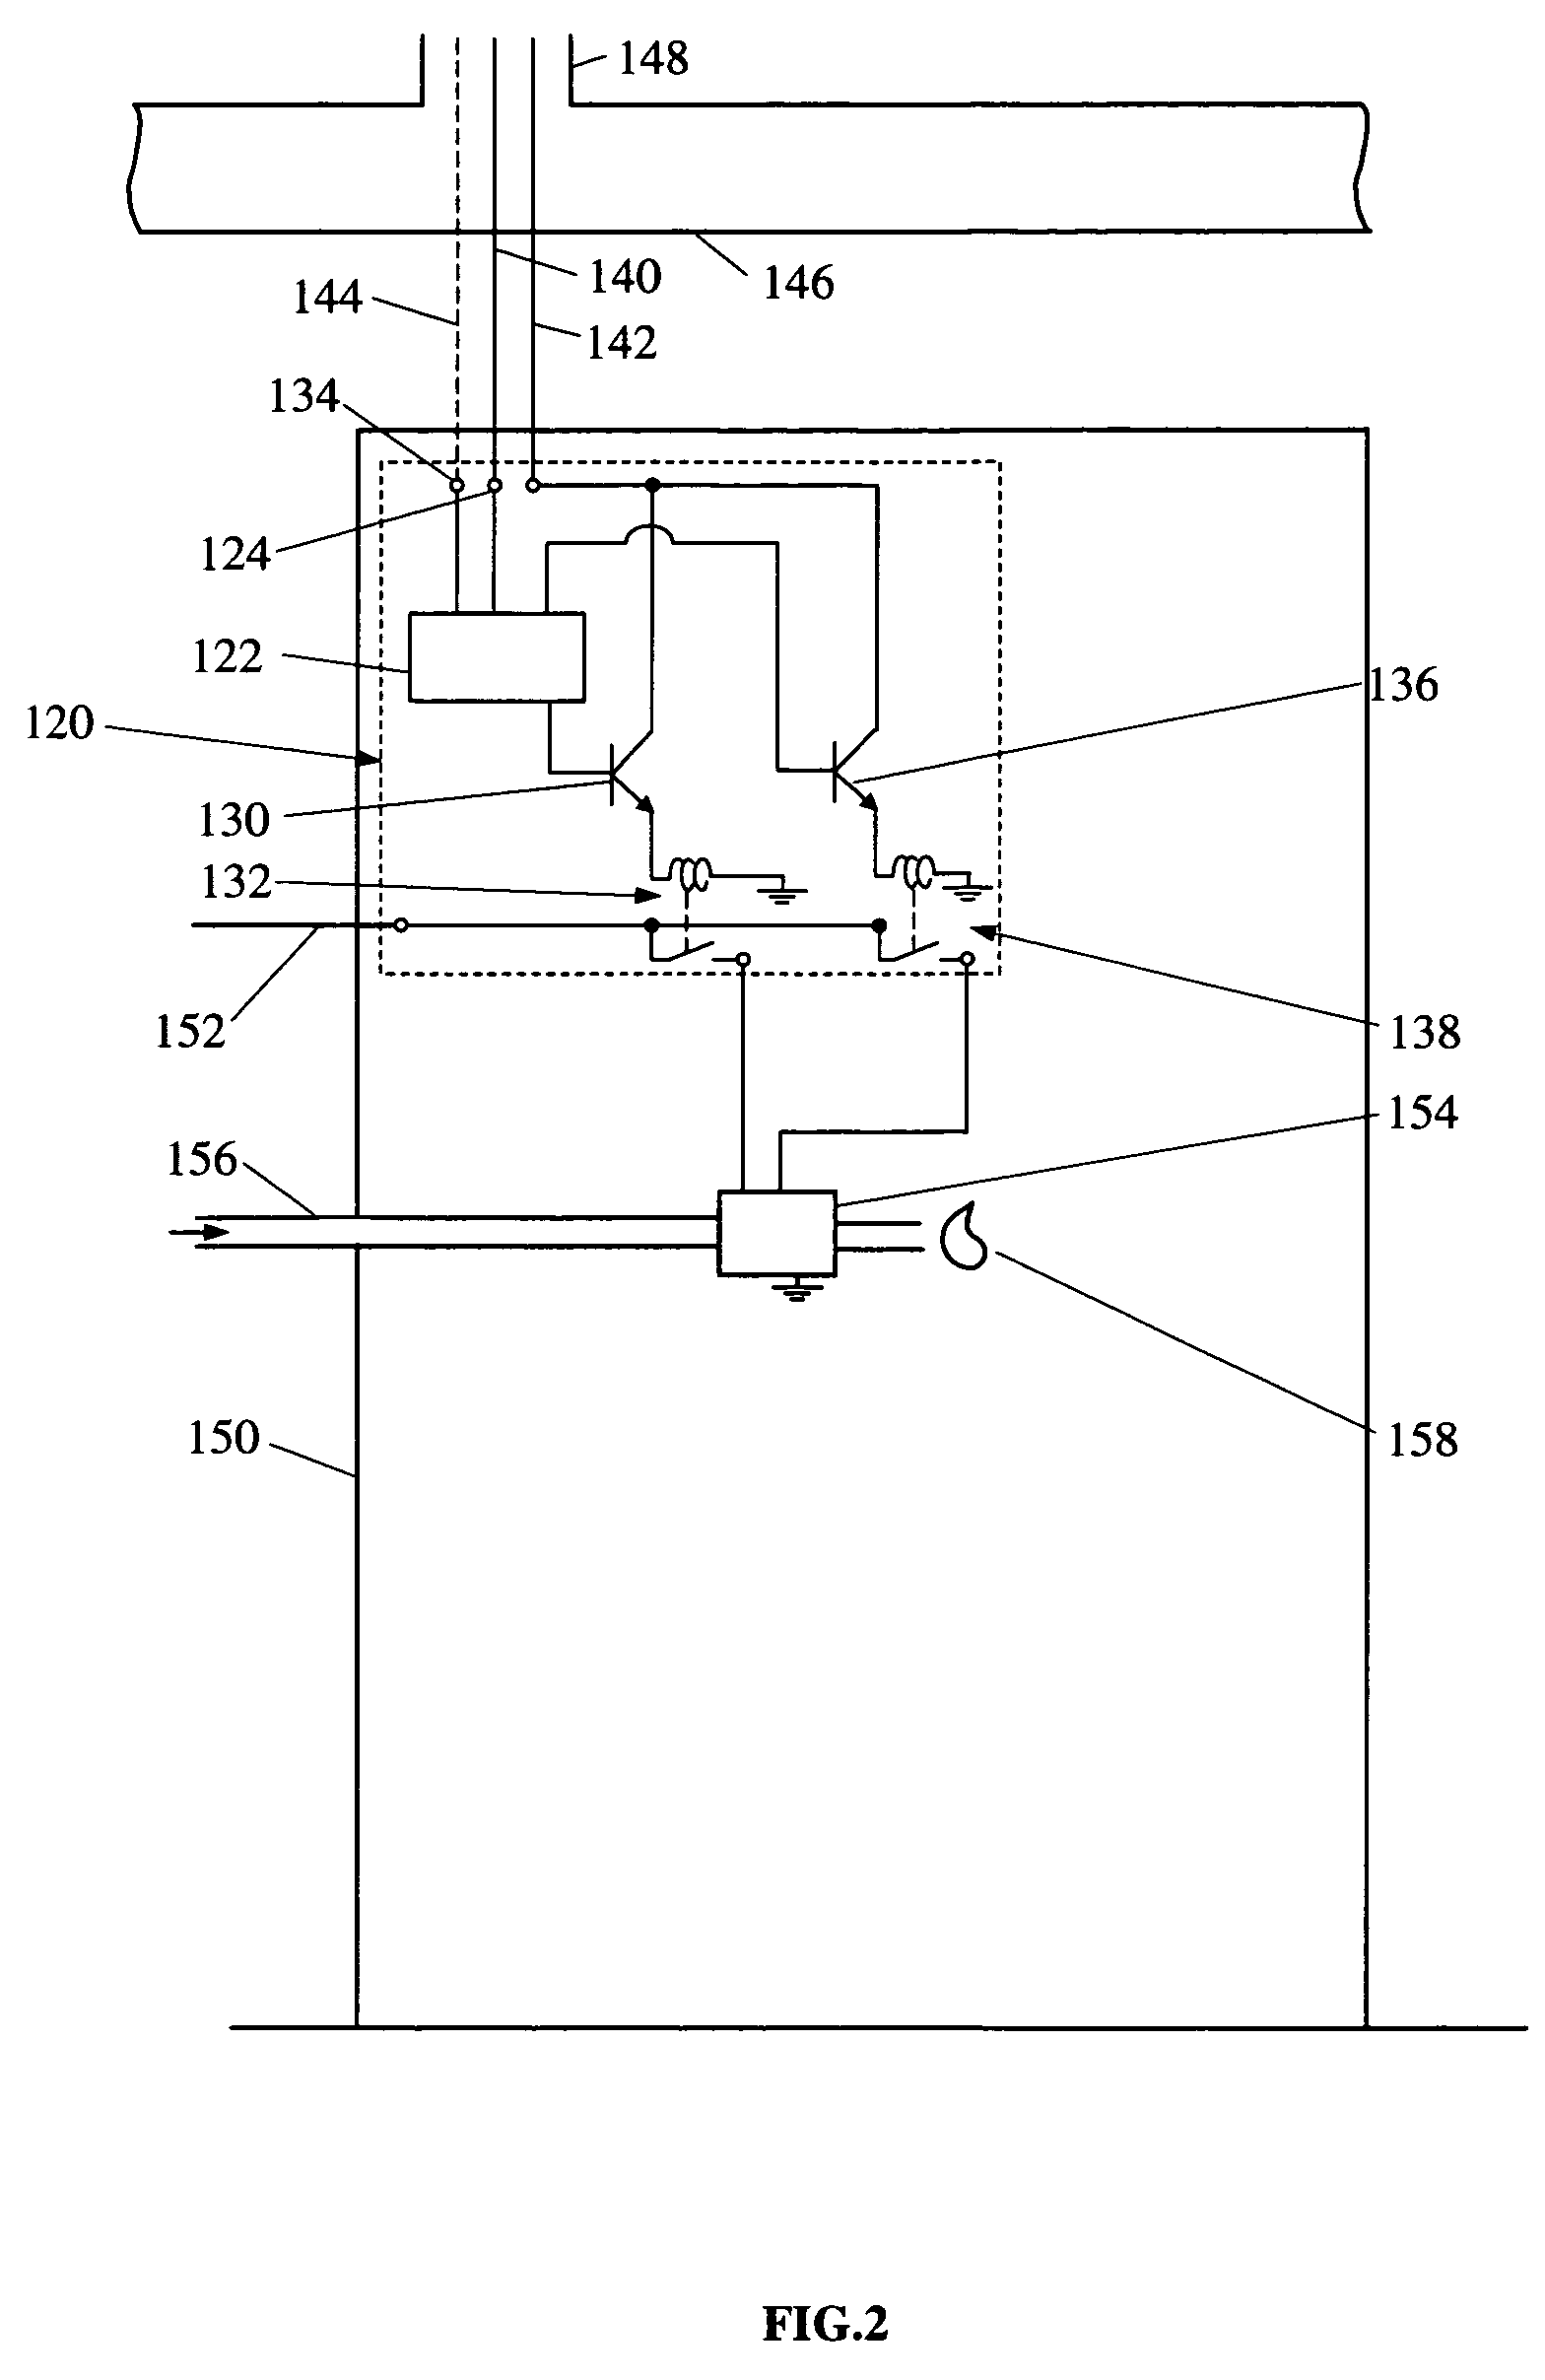 Controller for two-stage heat source usable with single and two stage thermostats